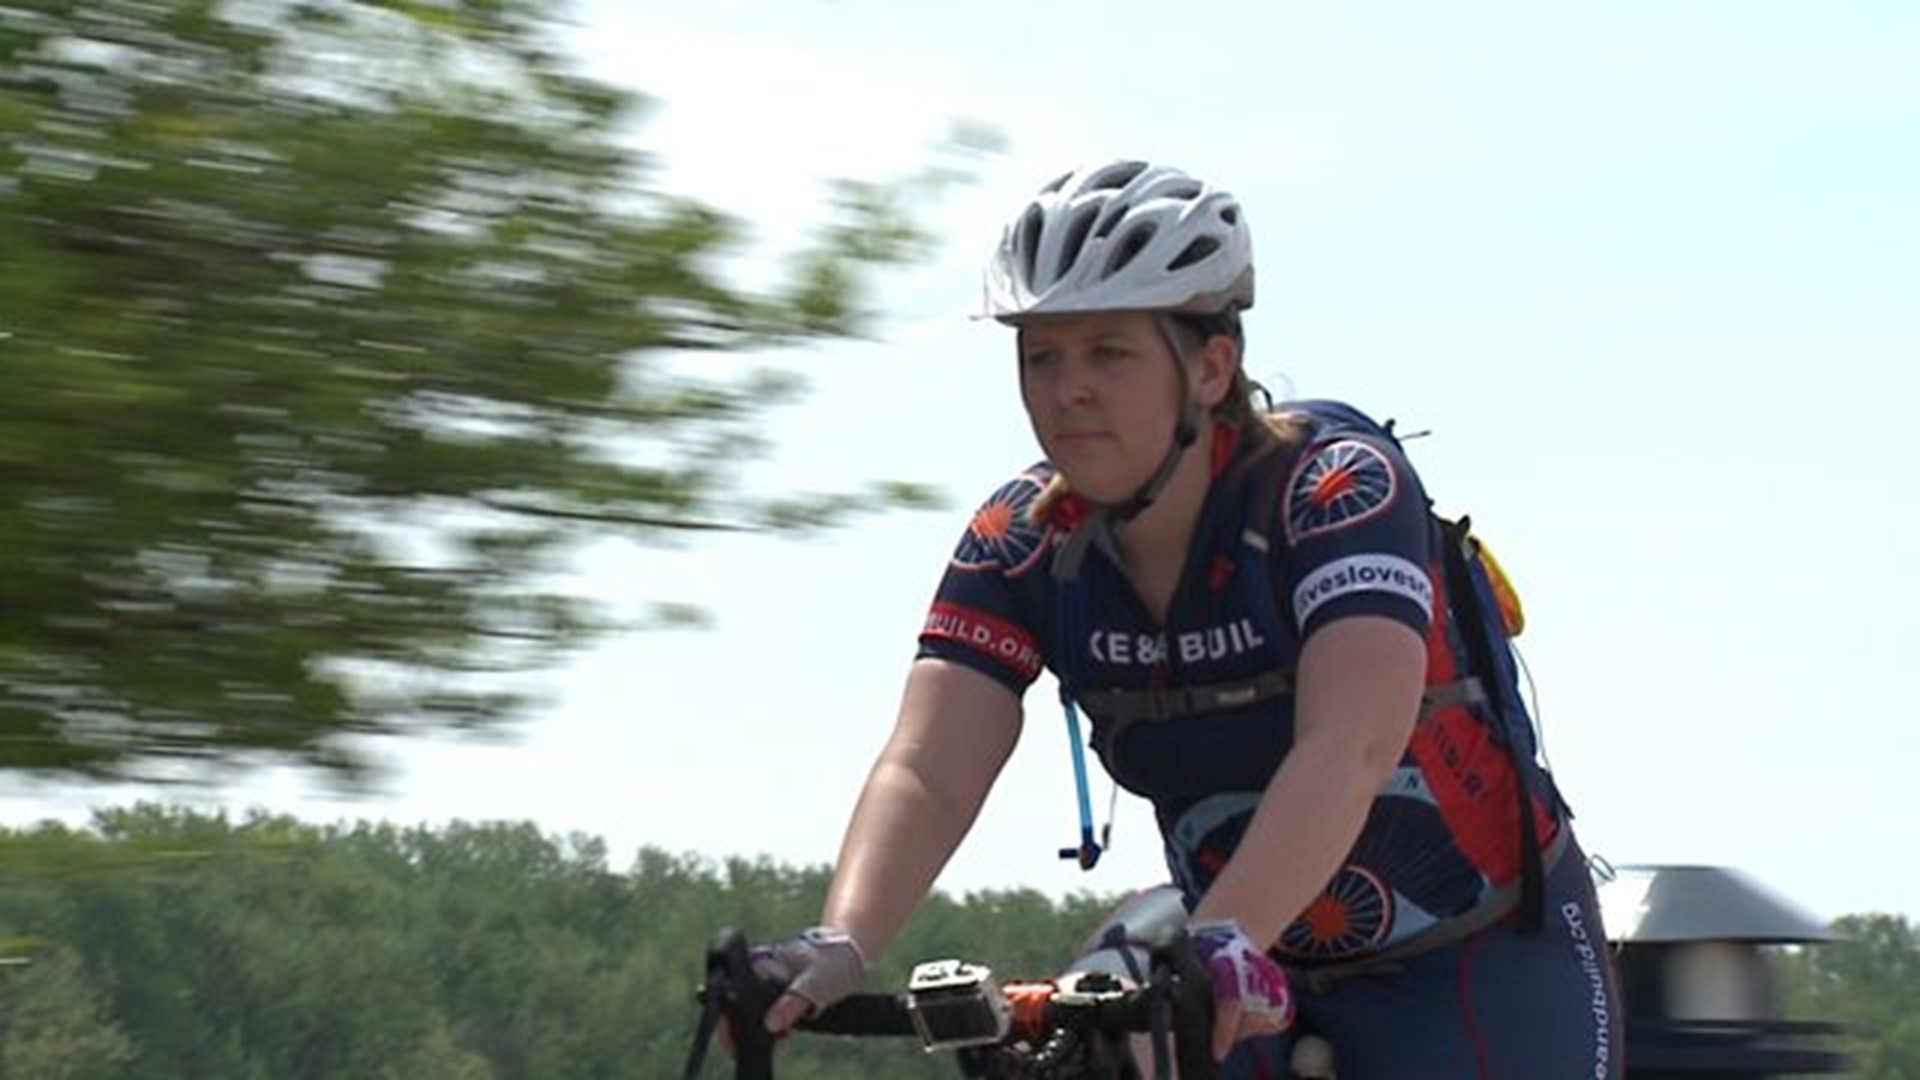 Clinton biker riding across country building homes